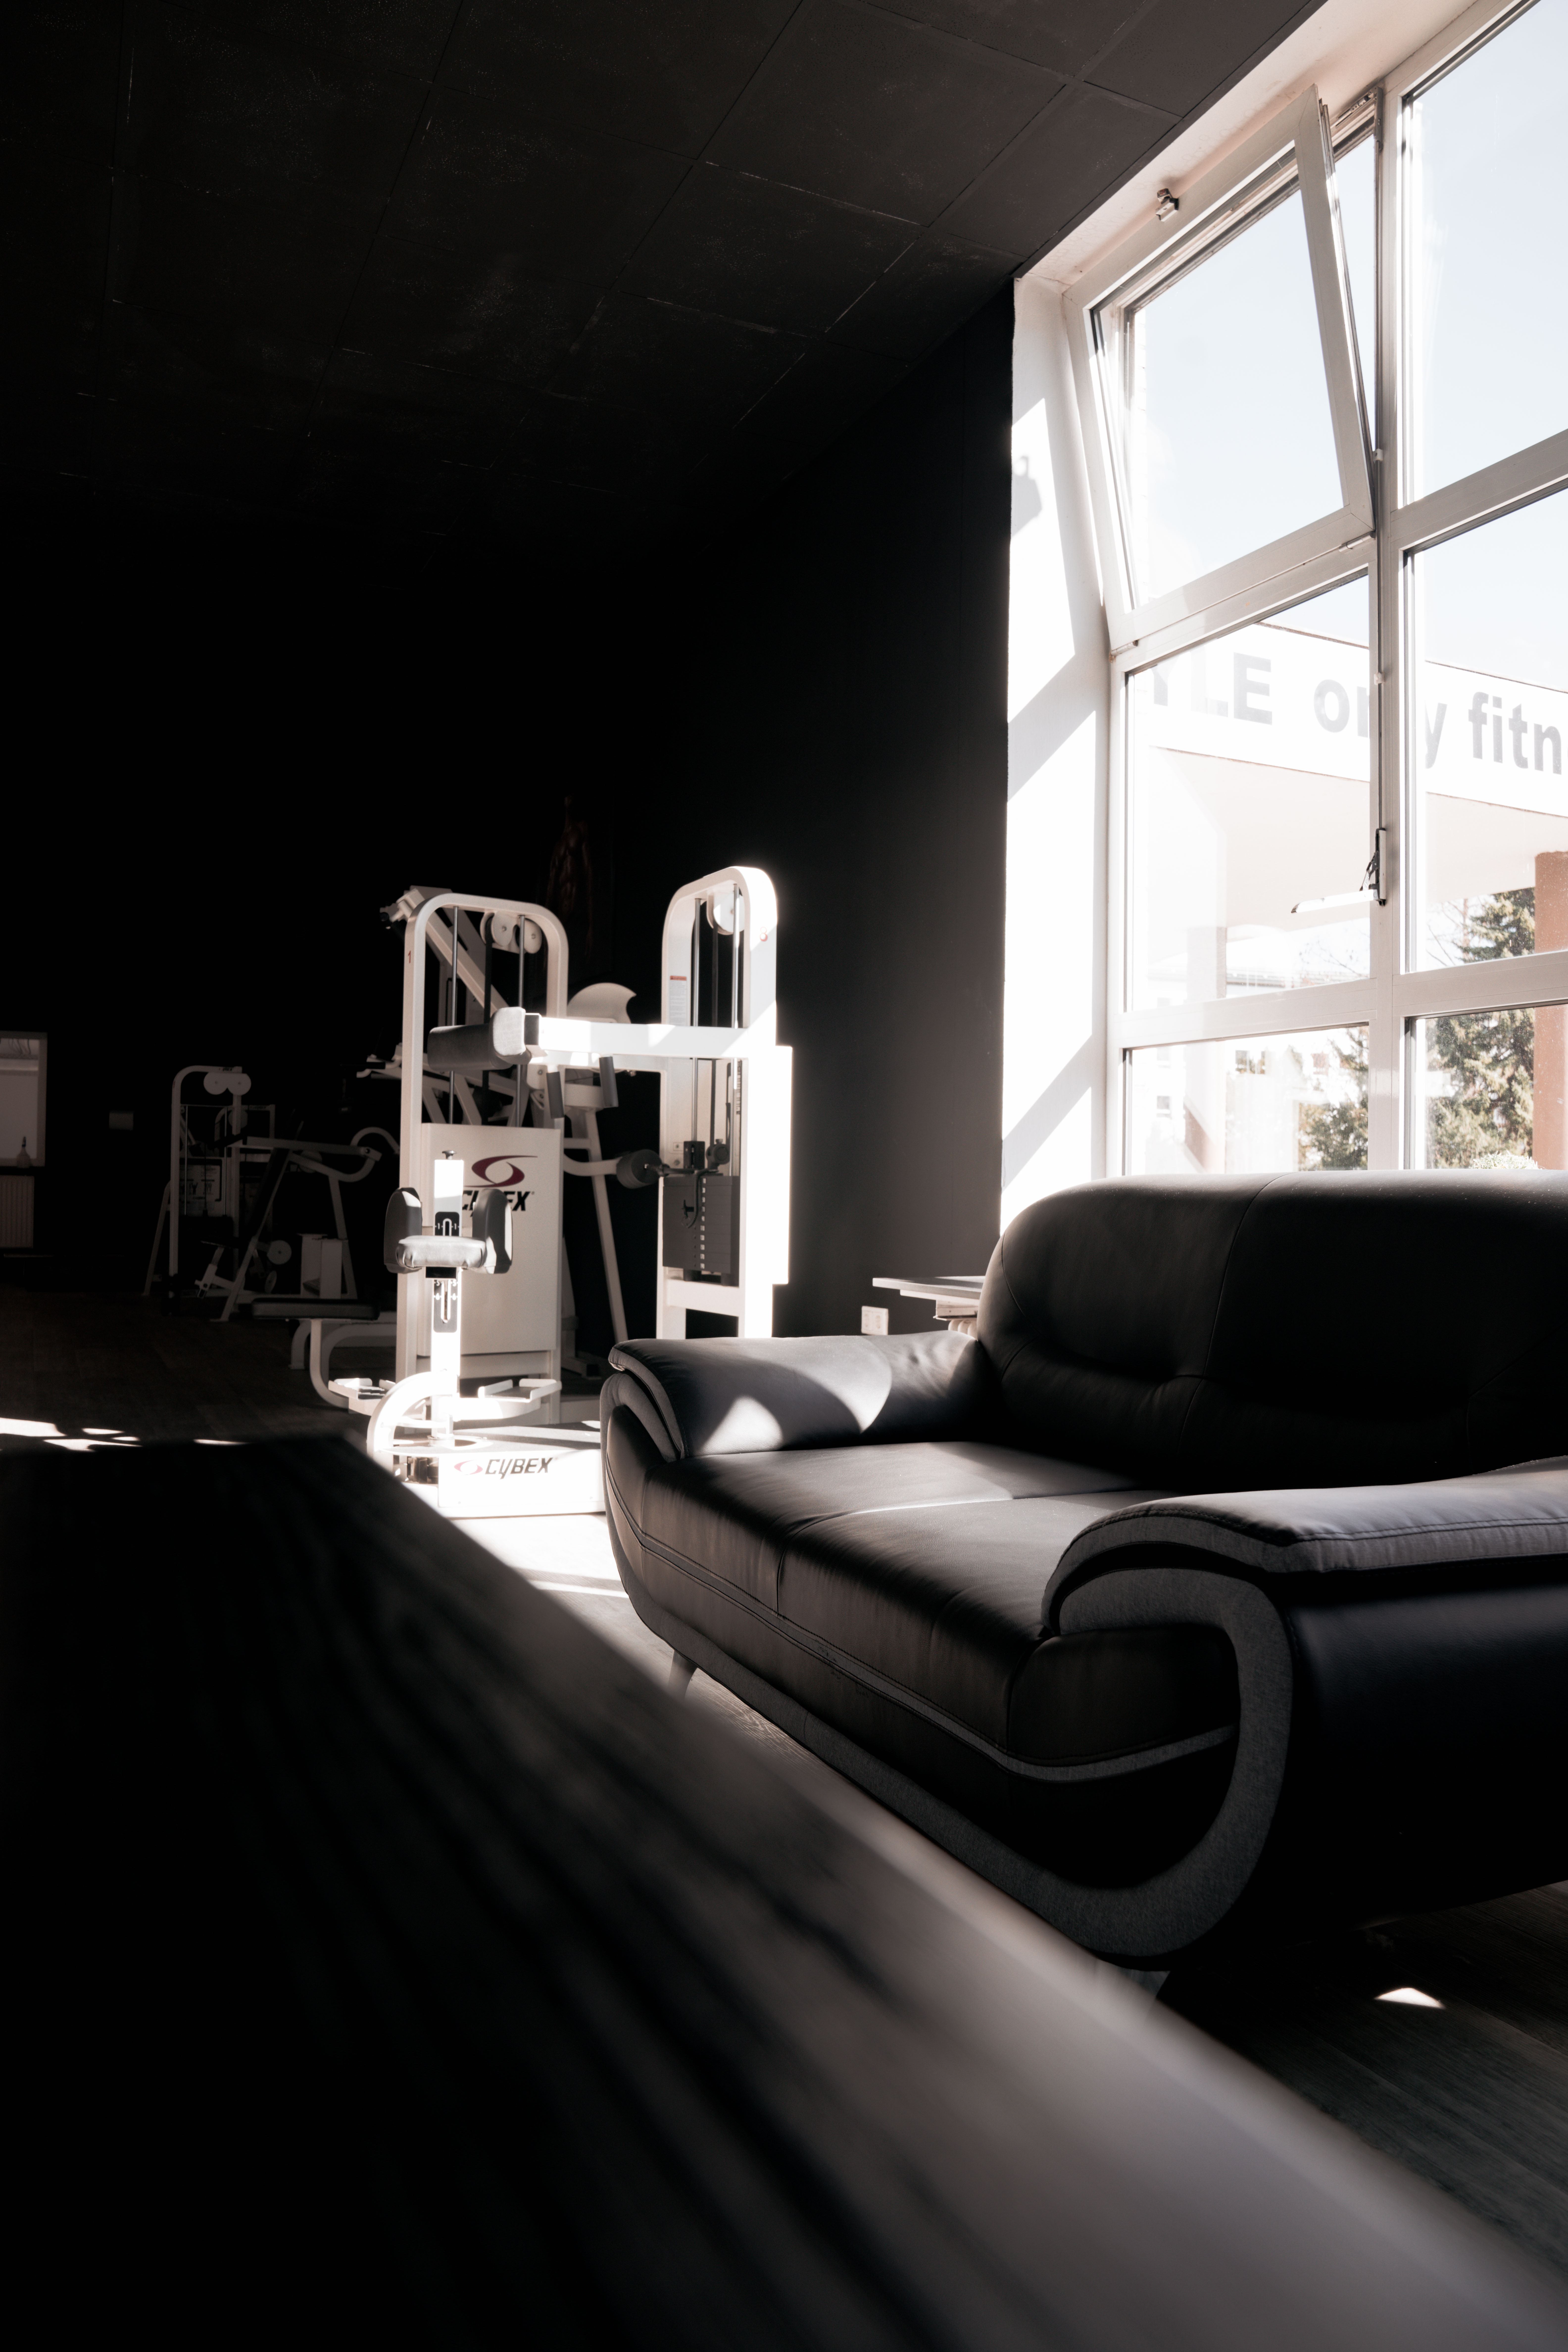 Interieur mit chill out area im only fitness